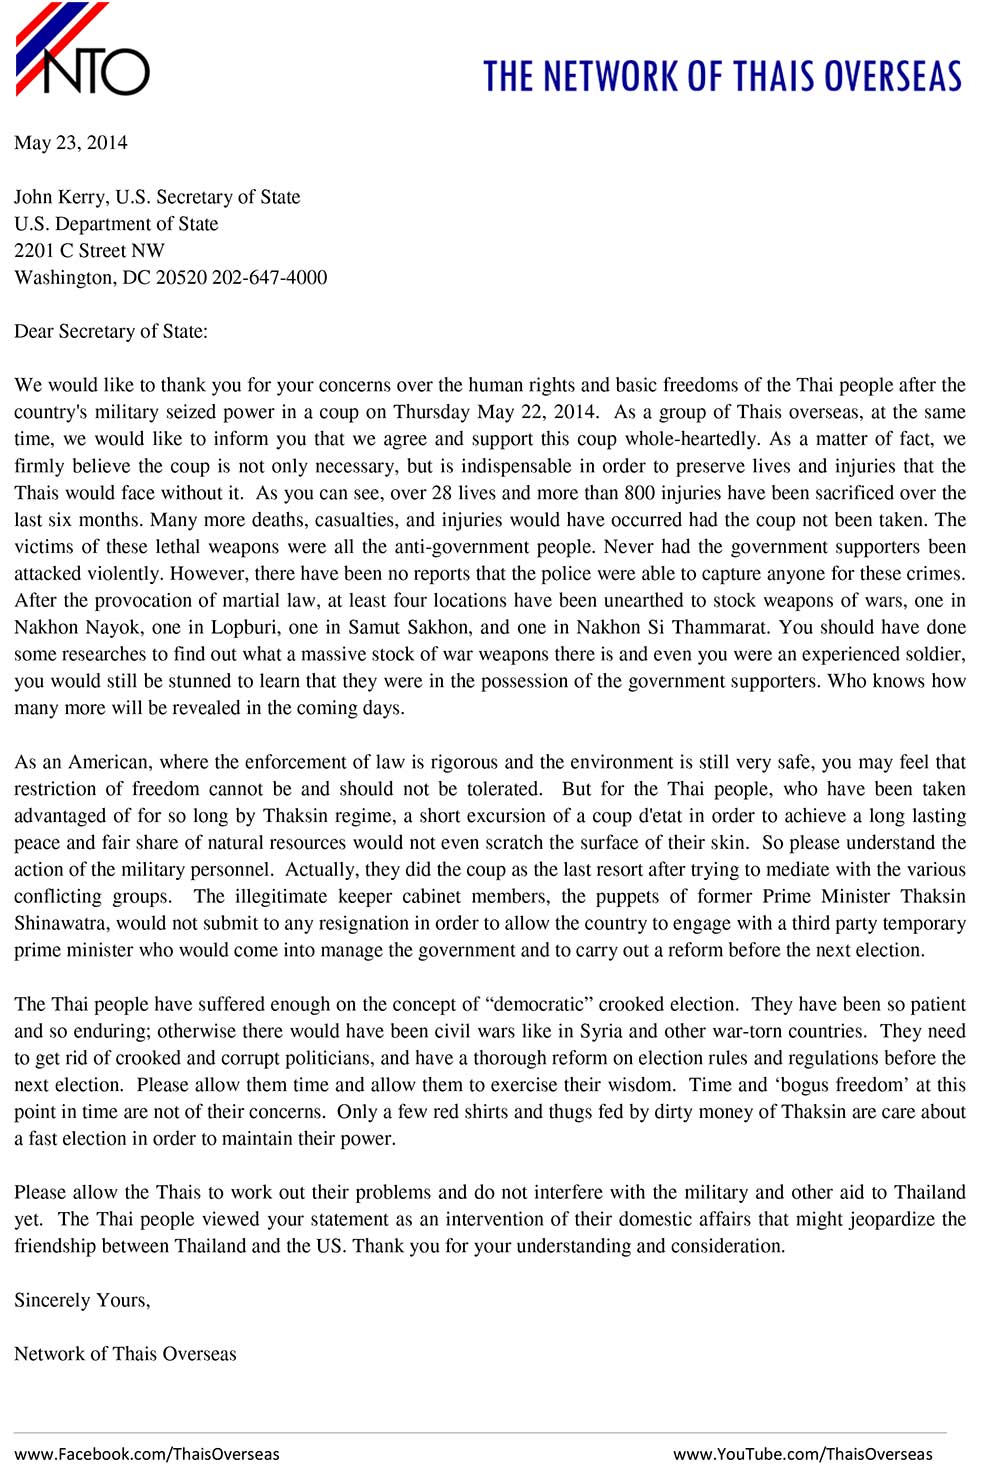 Open-Letter-to-John-Kerry-20140523